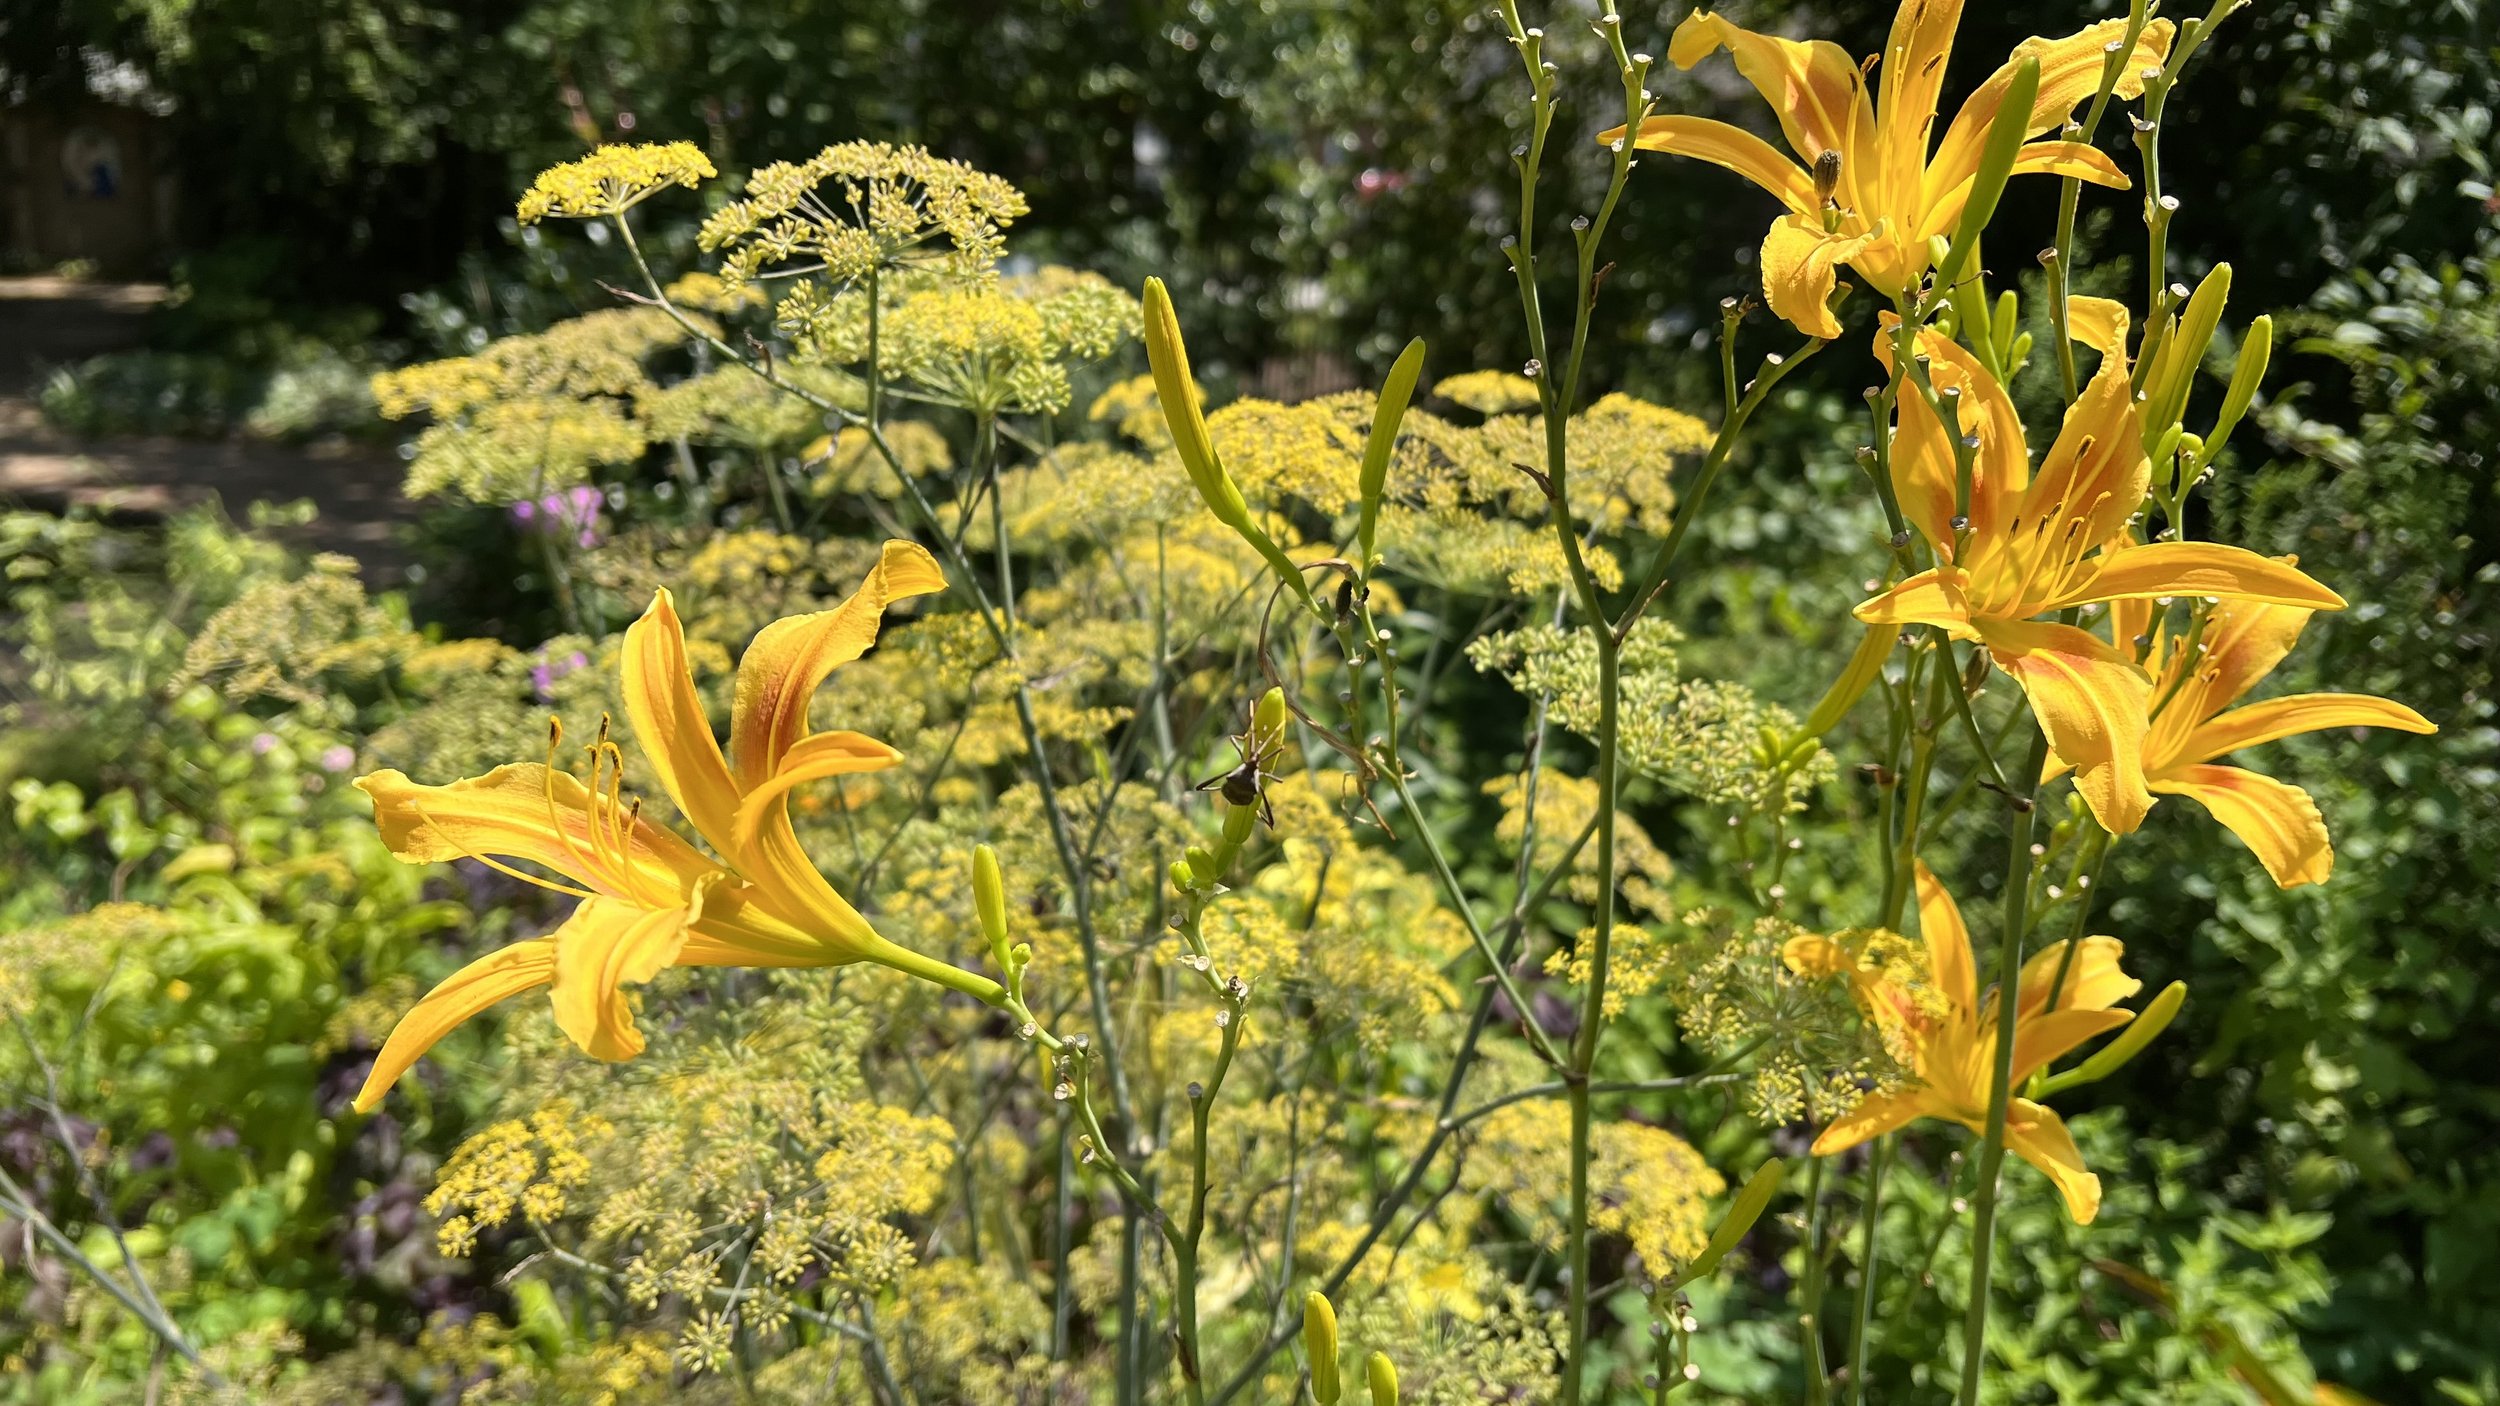 An inspired combination: daylily and bronze fennel